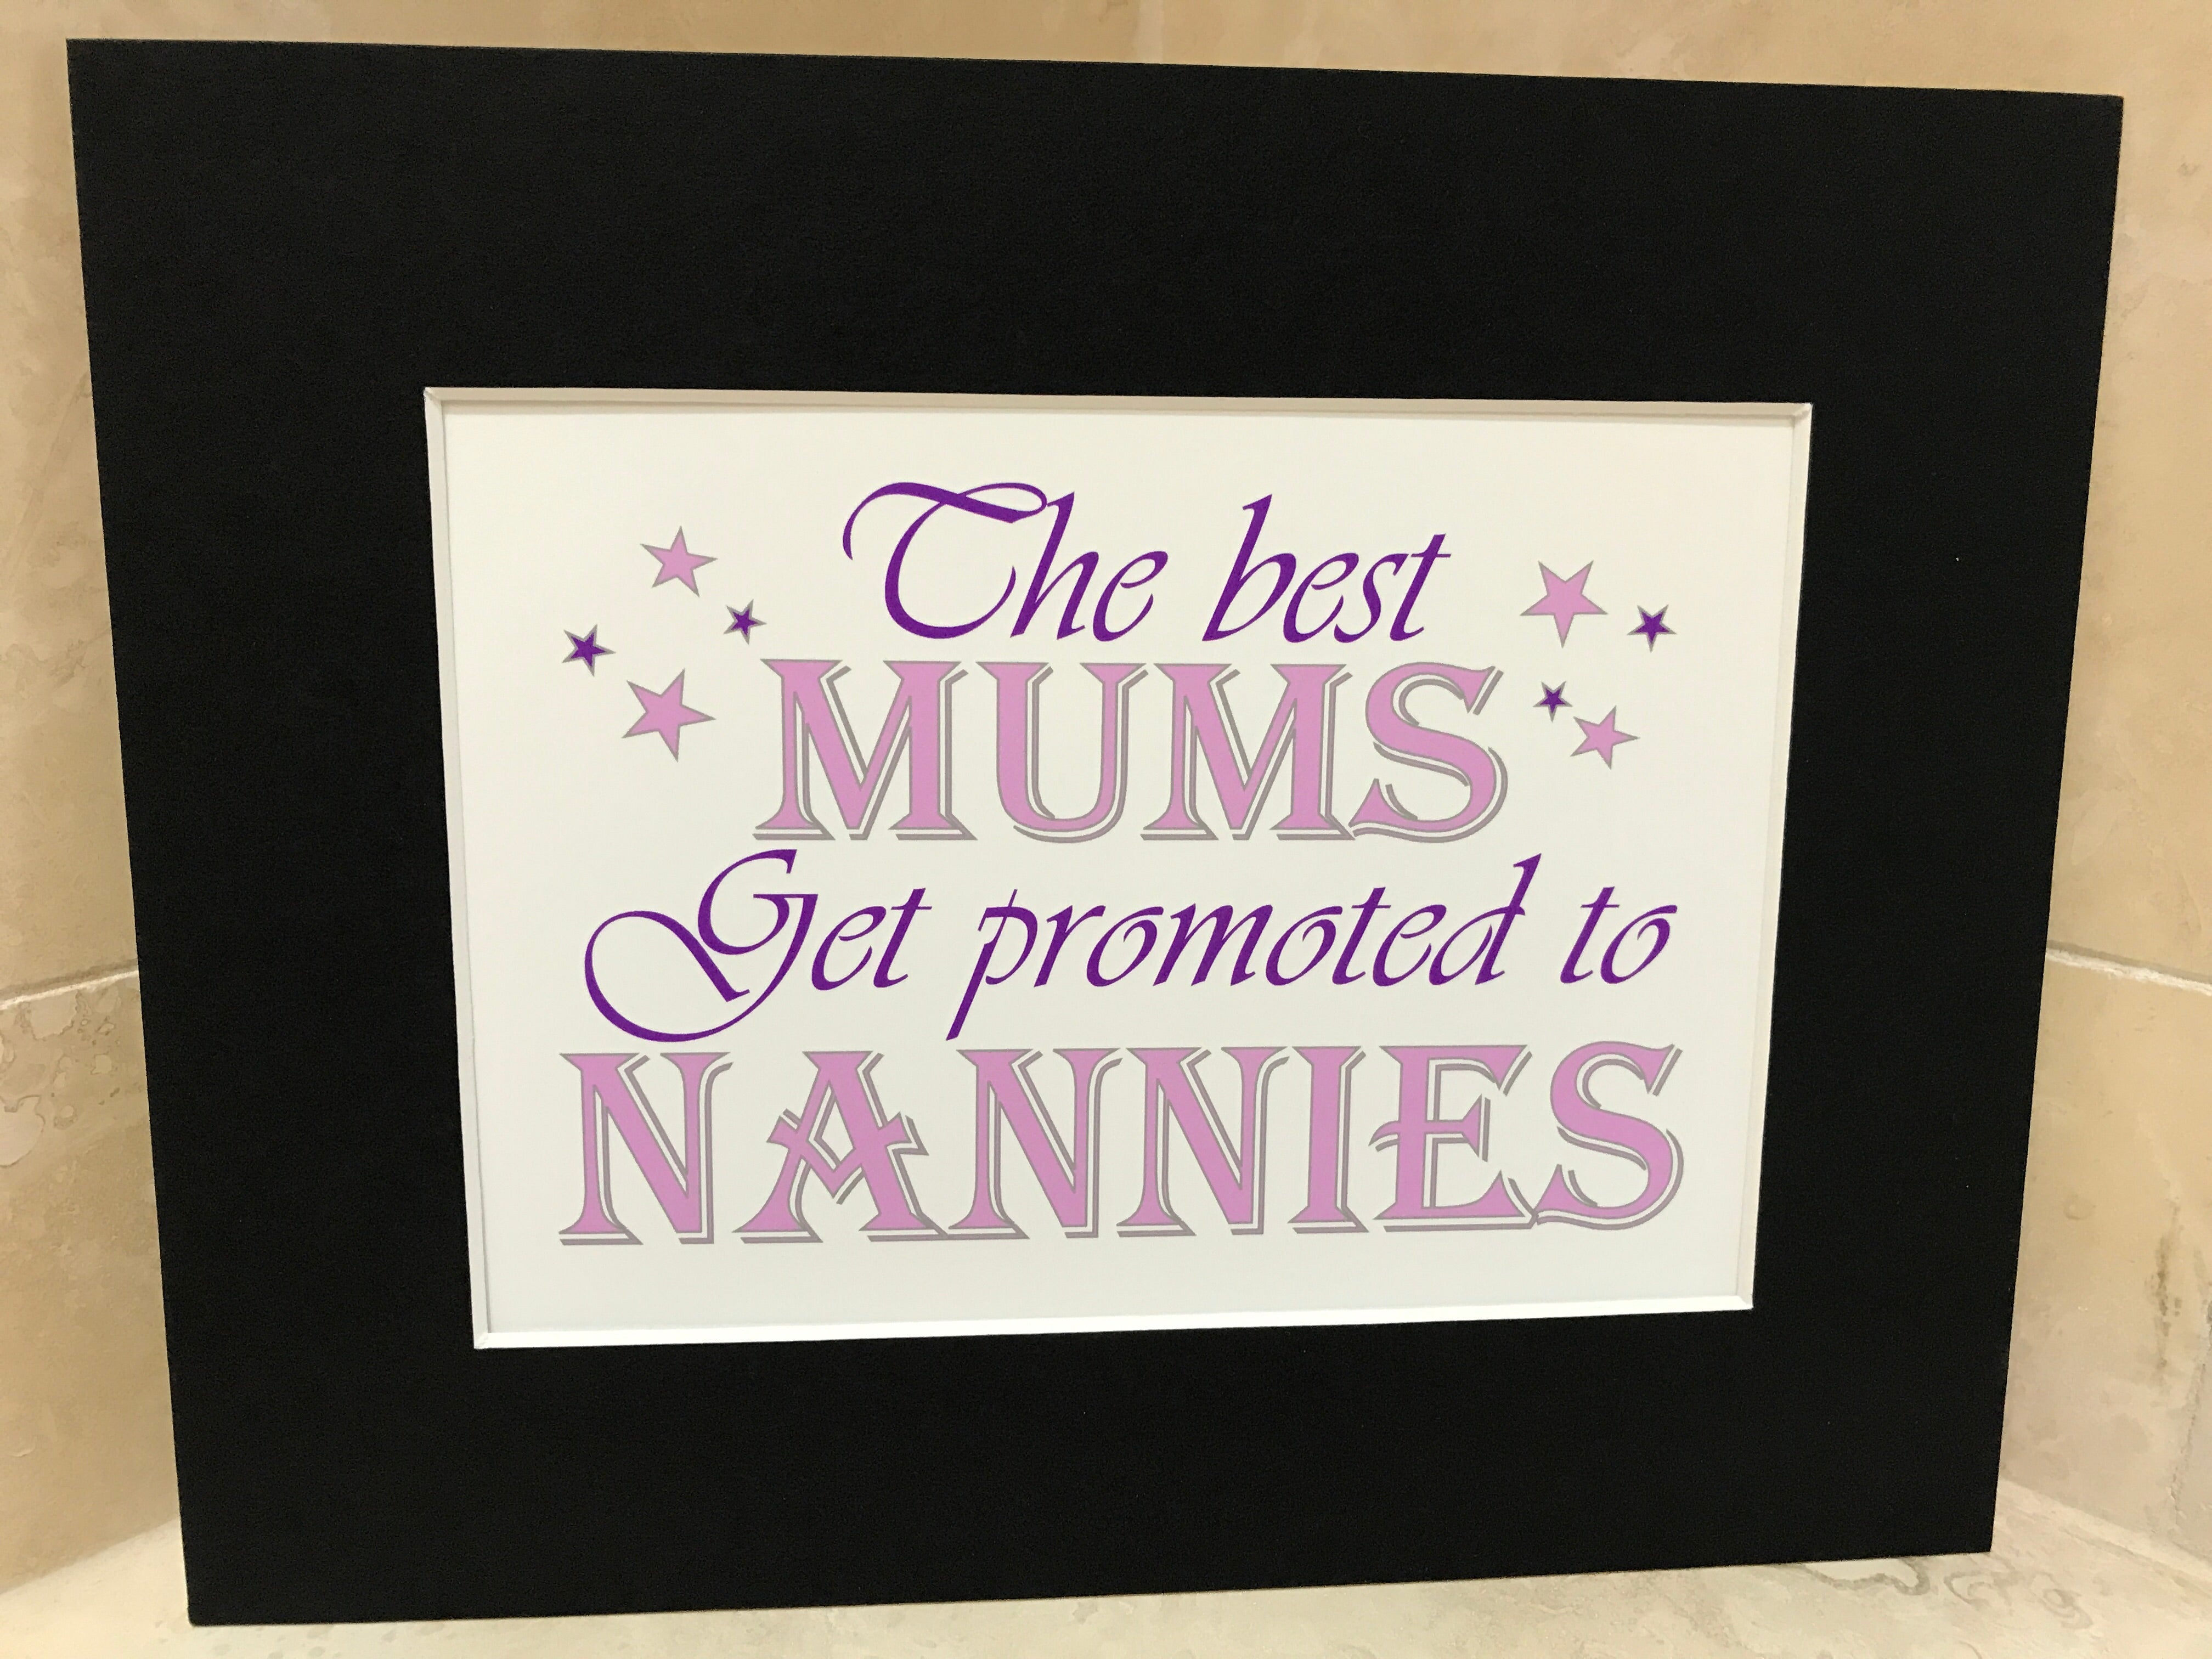 best mums get promoted to nanny